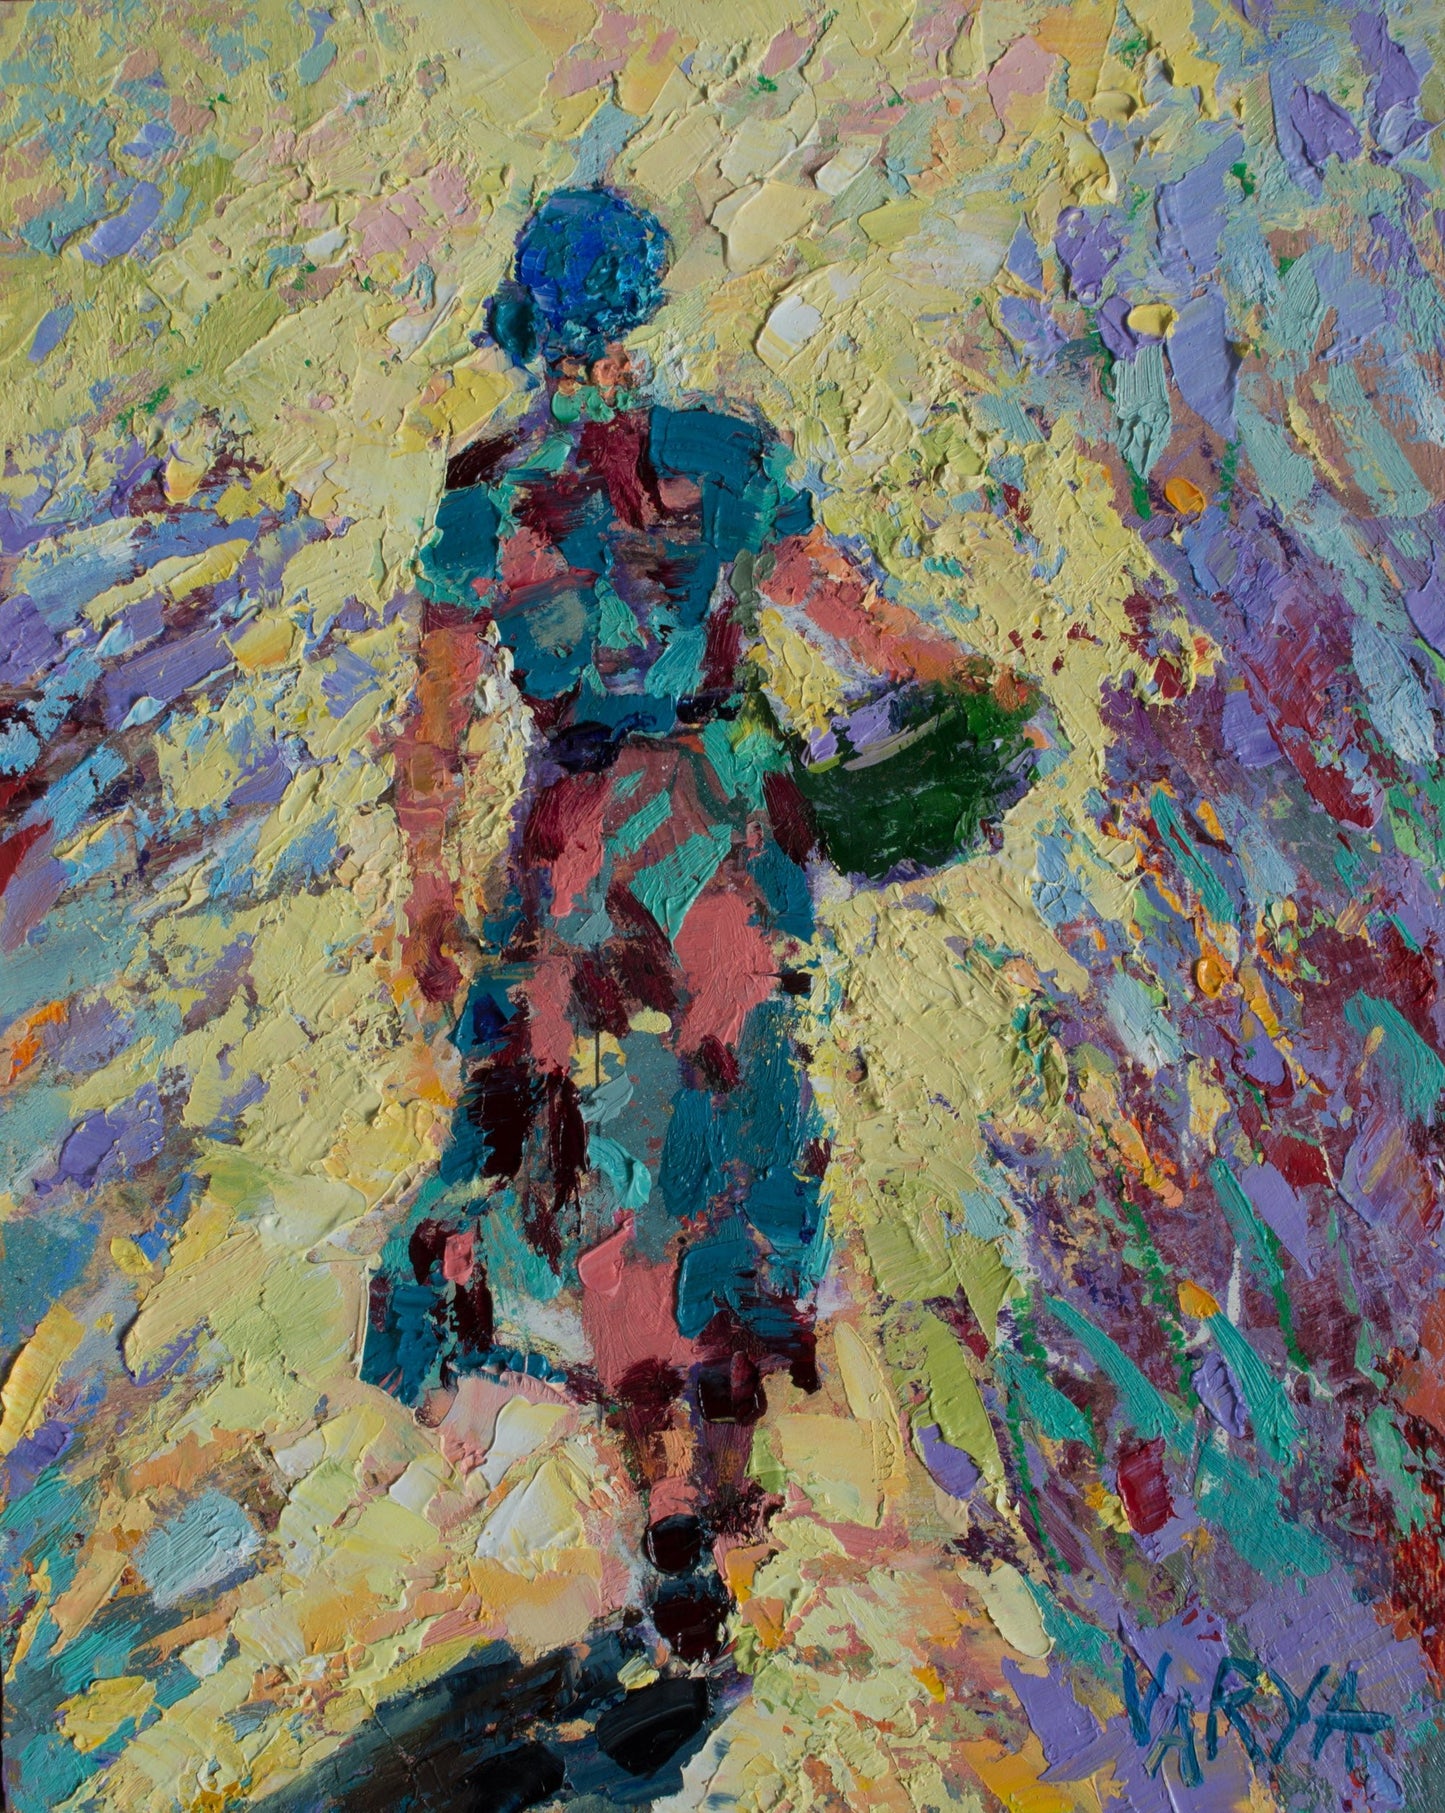 impressionist painting with a single figure of a woman